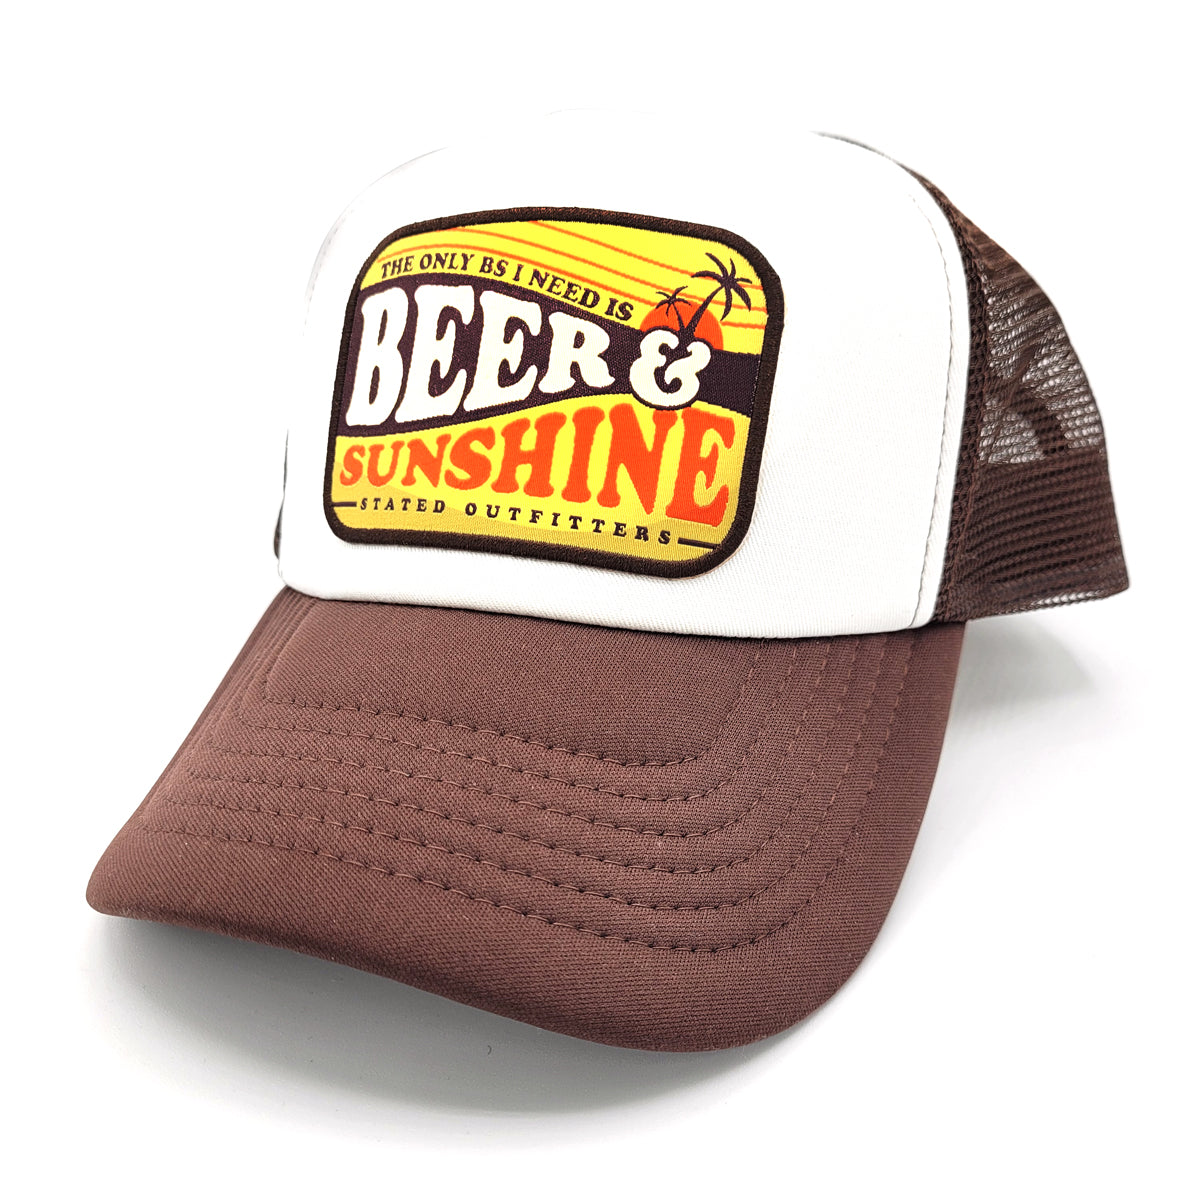 Stated Outfitters Beer and Sunshine Hat